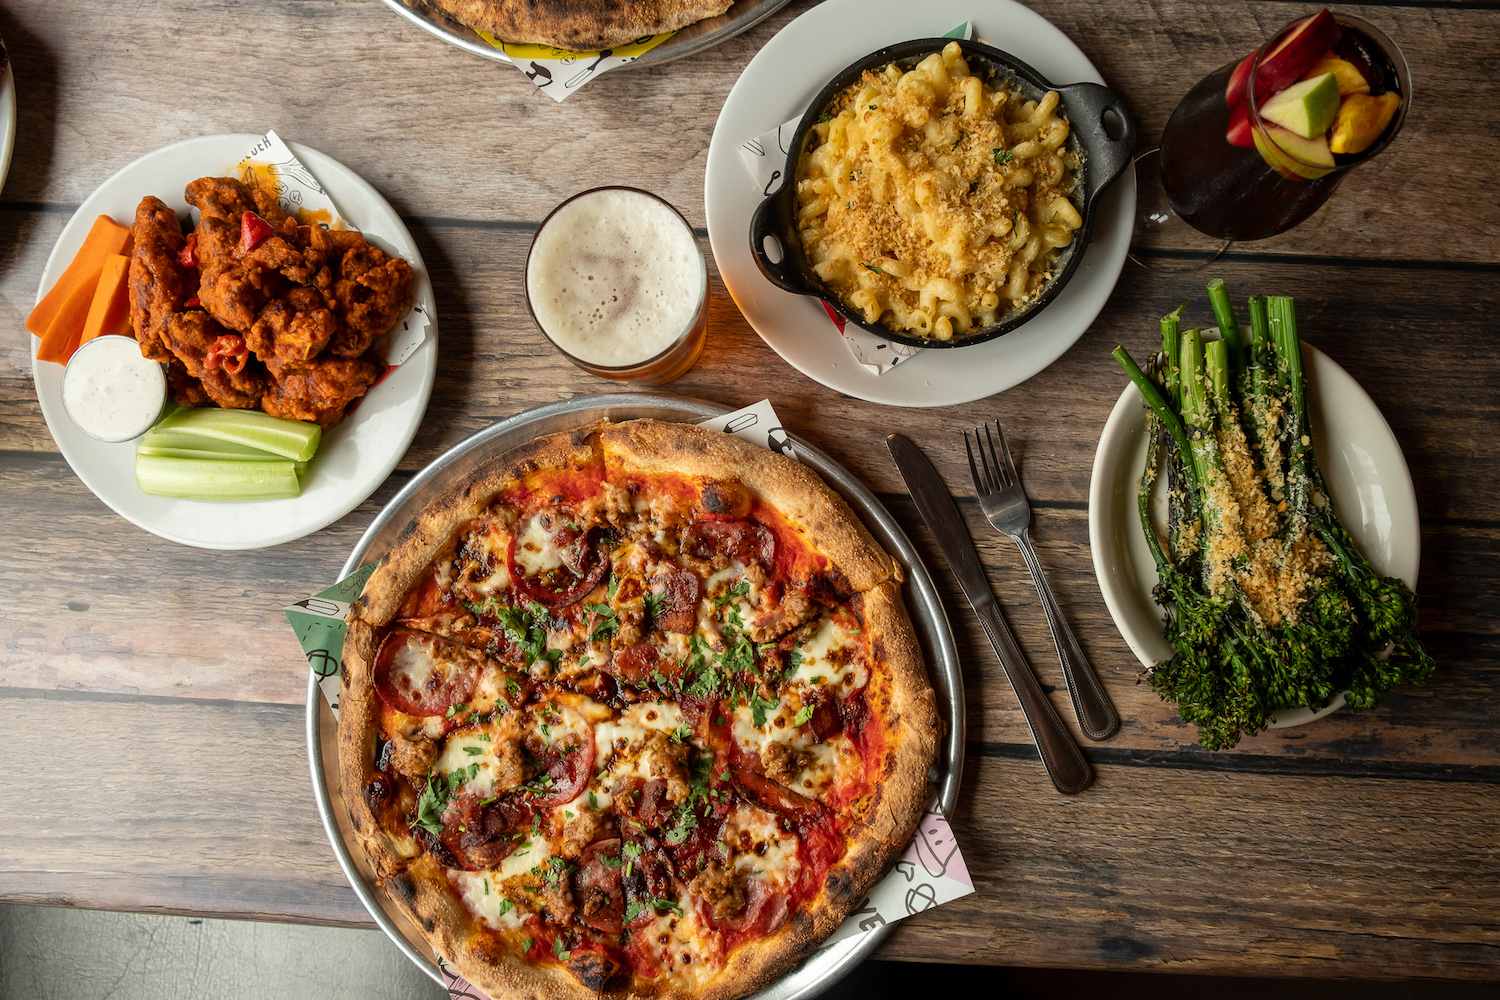 Birds-eye view of pizza, broccoli florets, mac and cheese and wings on a table